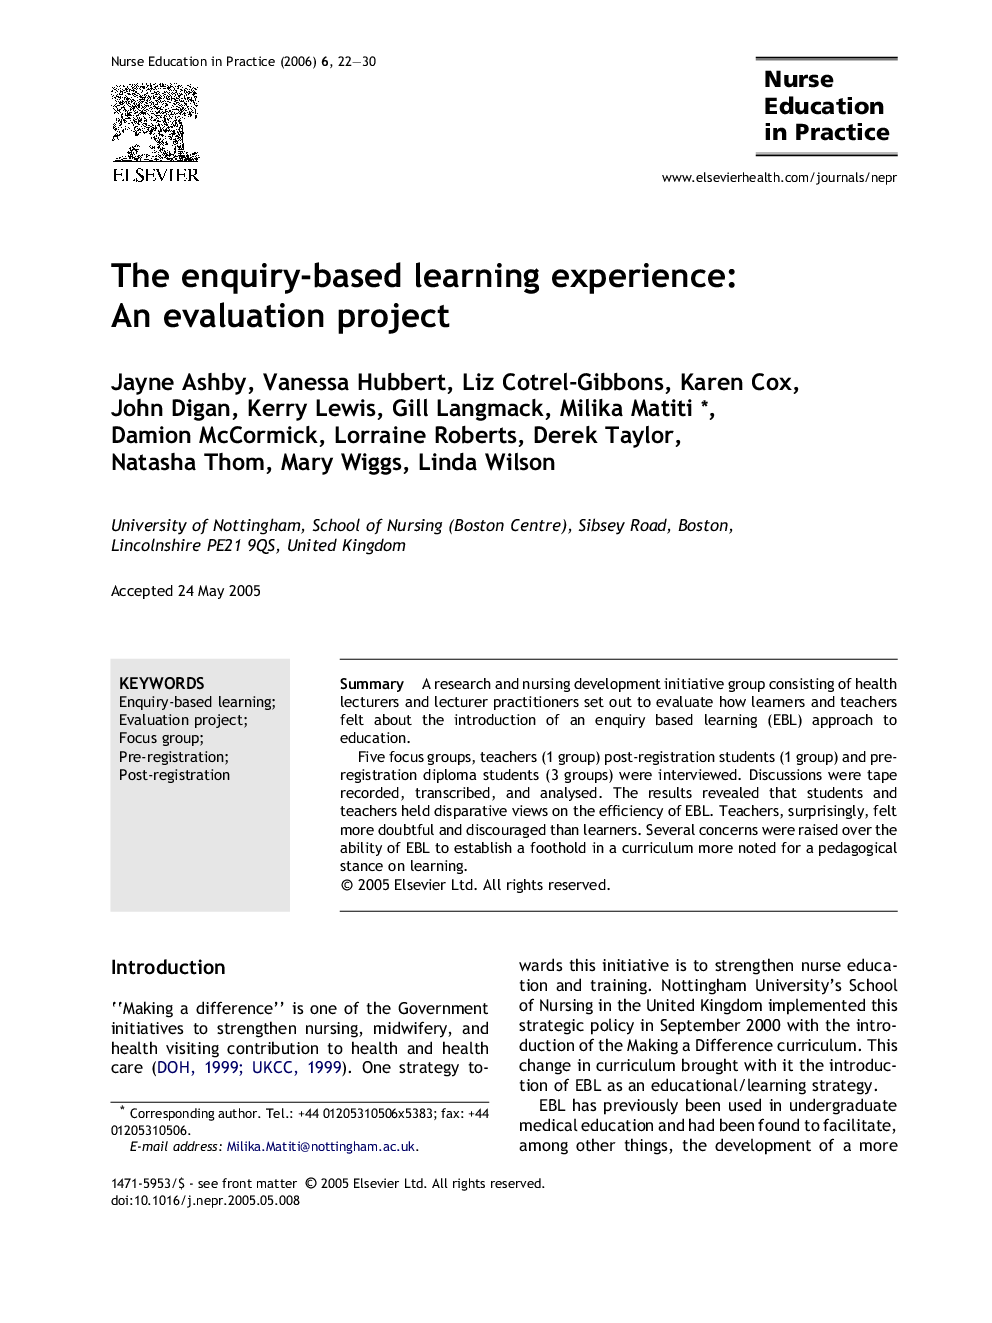 The enquiry-based learning experience: An evaluation project